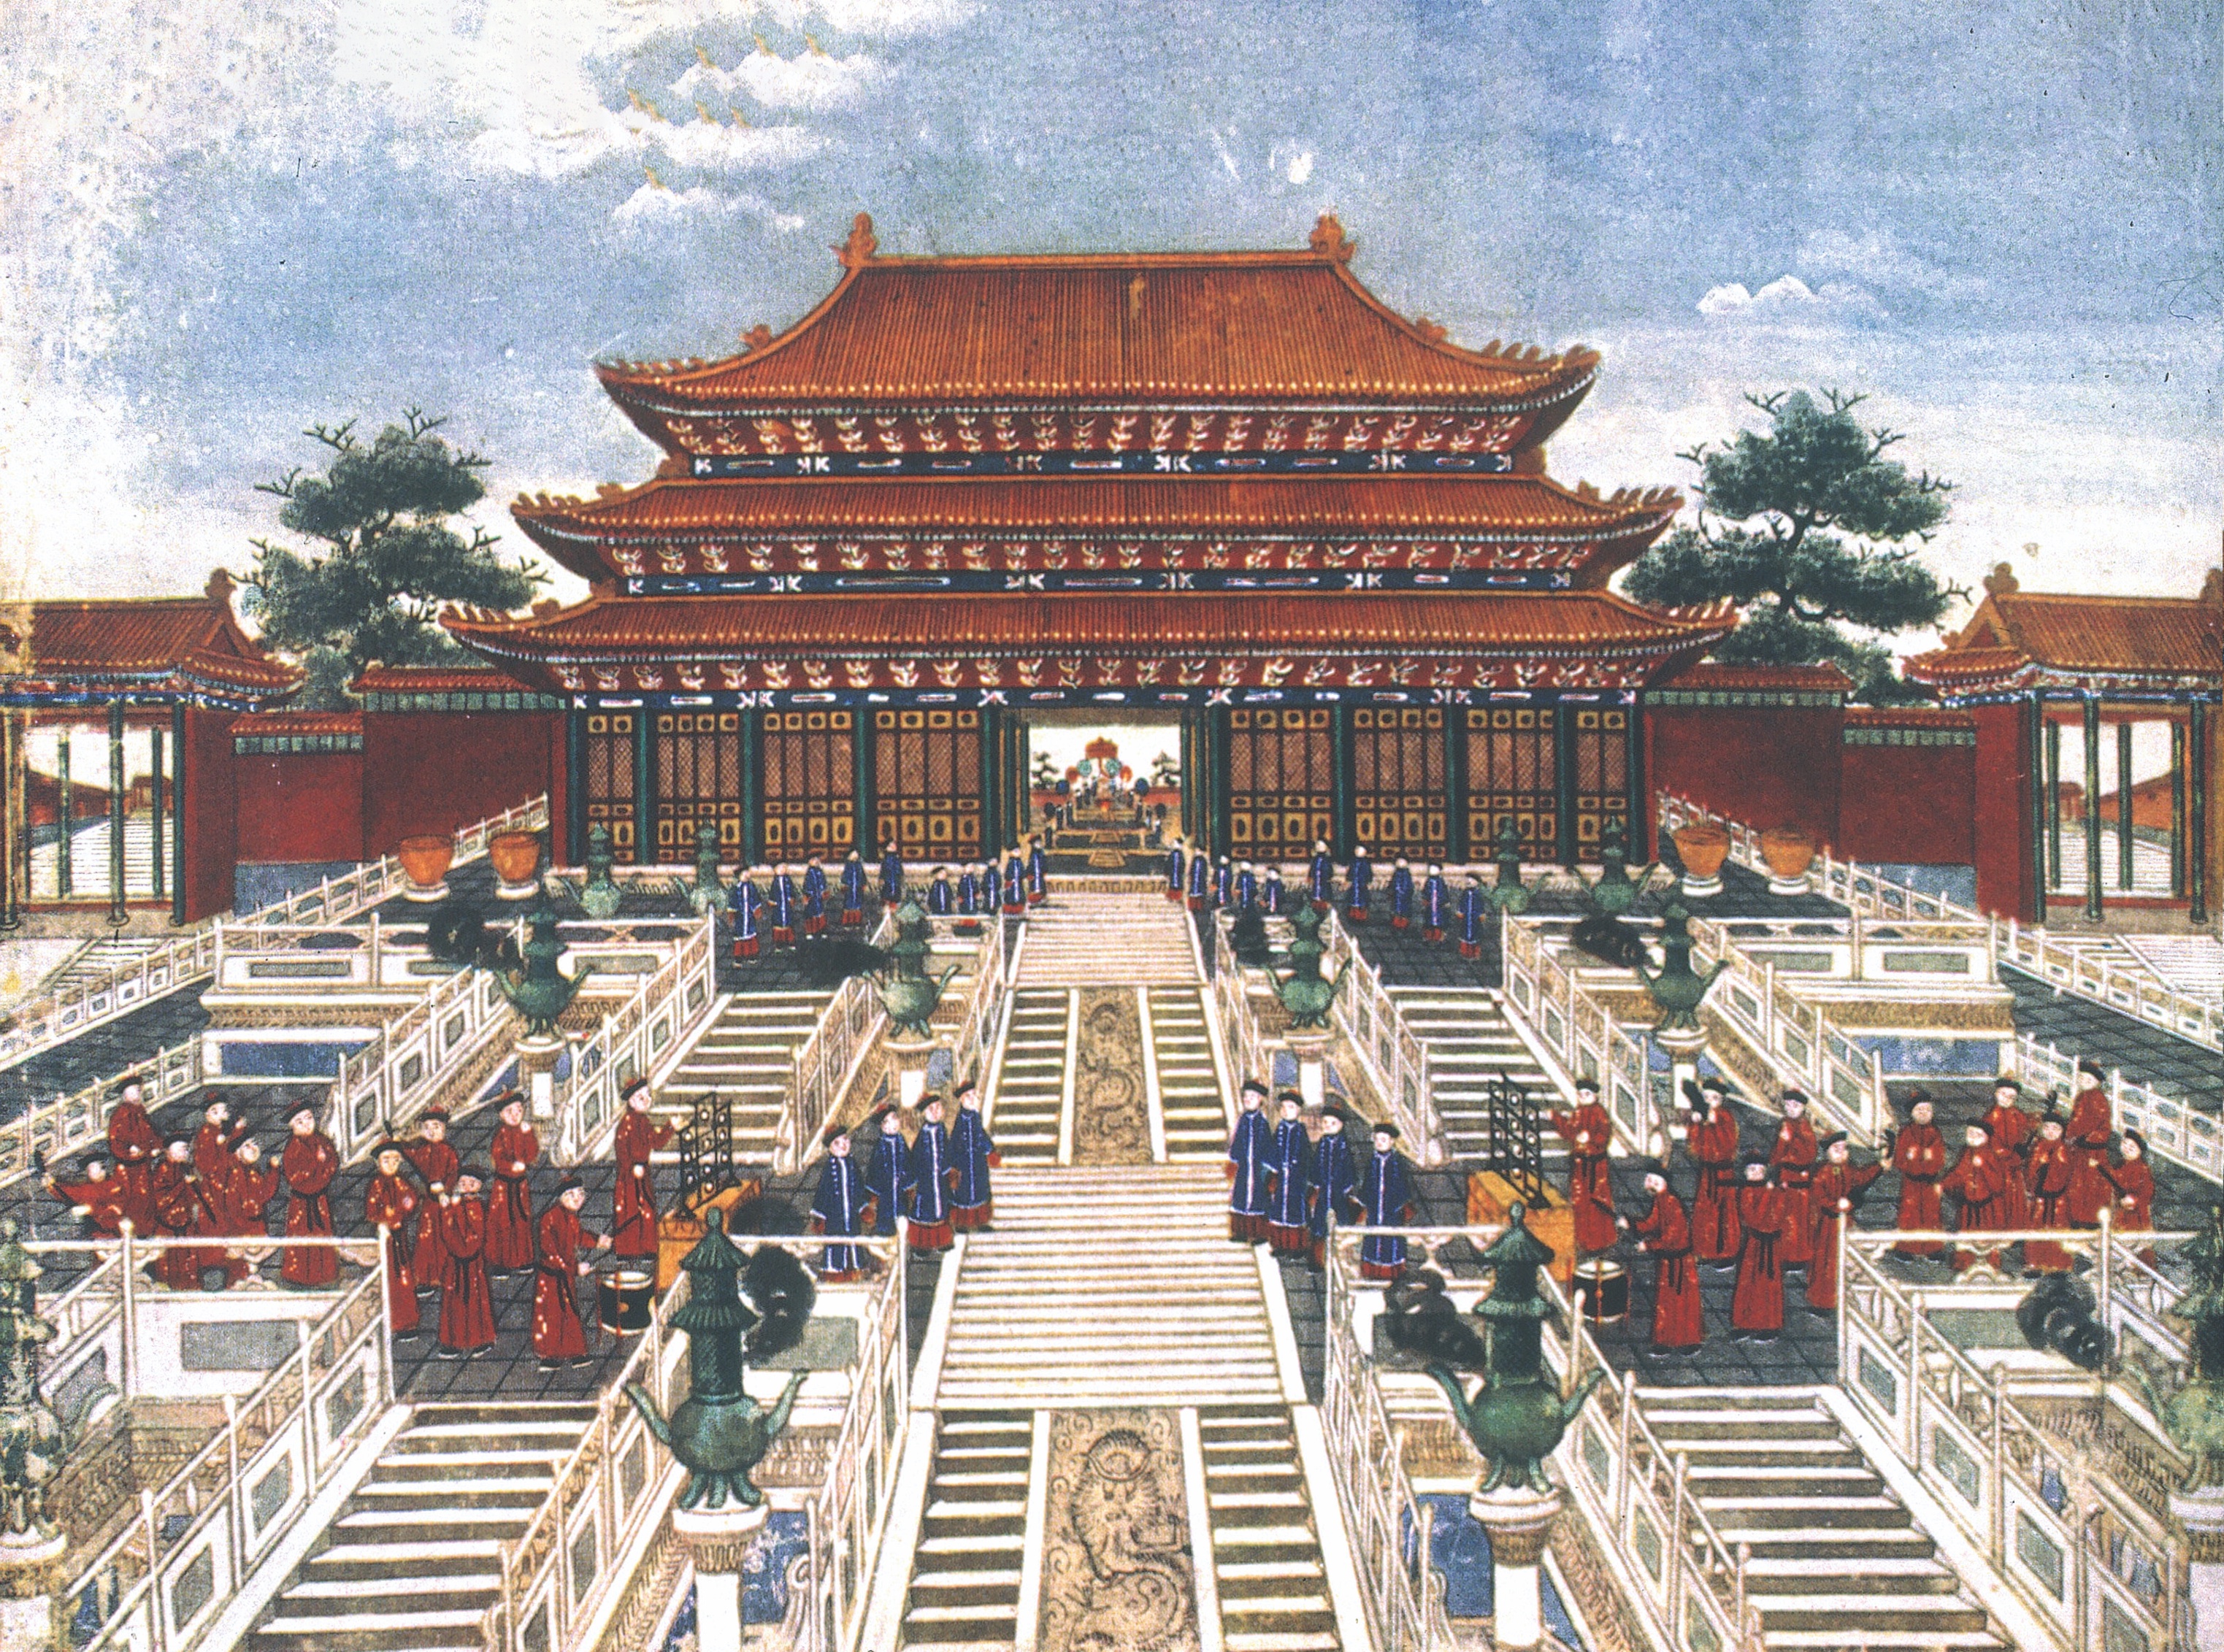 After Zhu Di ascended the throne, taking the imperial name of Yongle, he moved the imperial capital to his old stronghold of Beijing and constructed the massive palace complex known as the Forbidden City. (Granger)